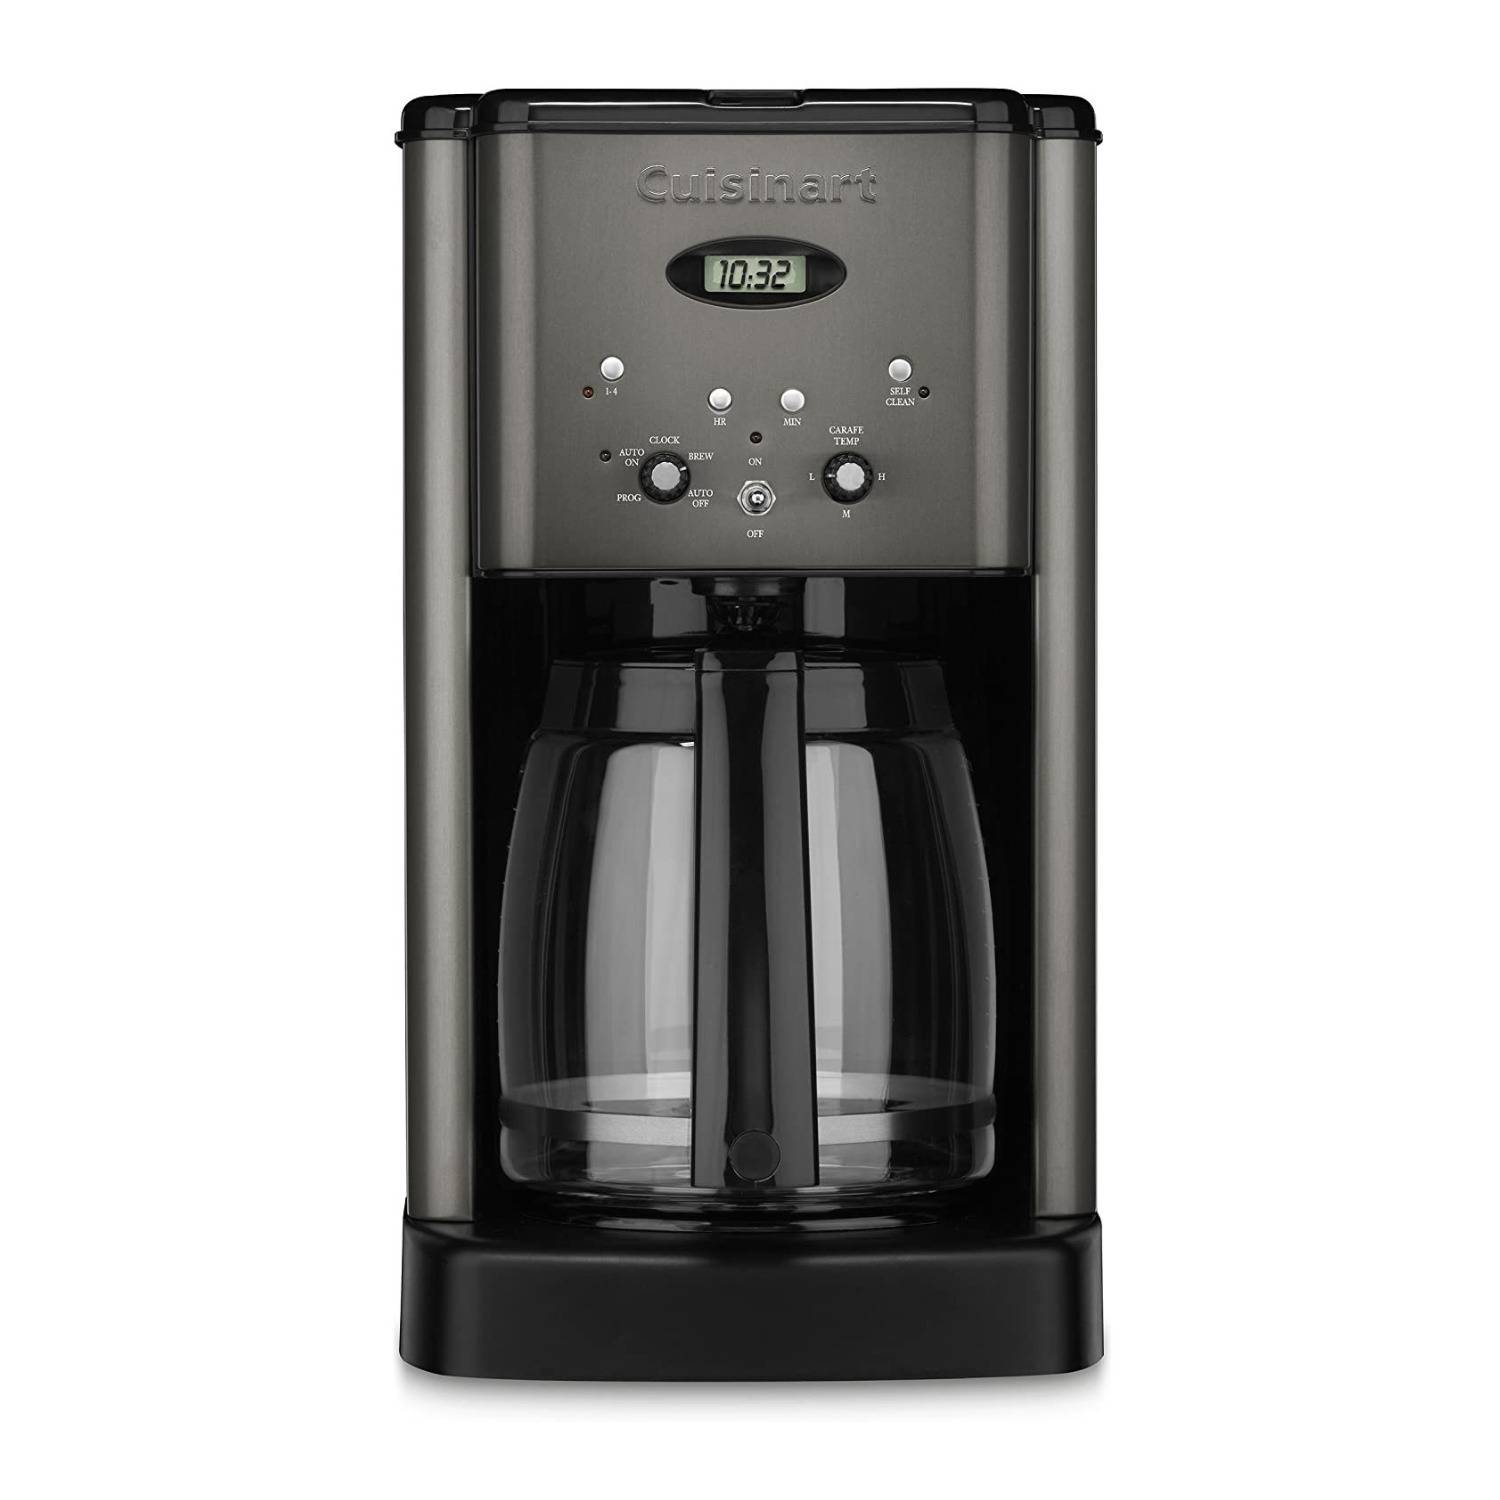 Cuisinart 12-Cup Brew Central Programmable Coffeemaker (Black Stainless)